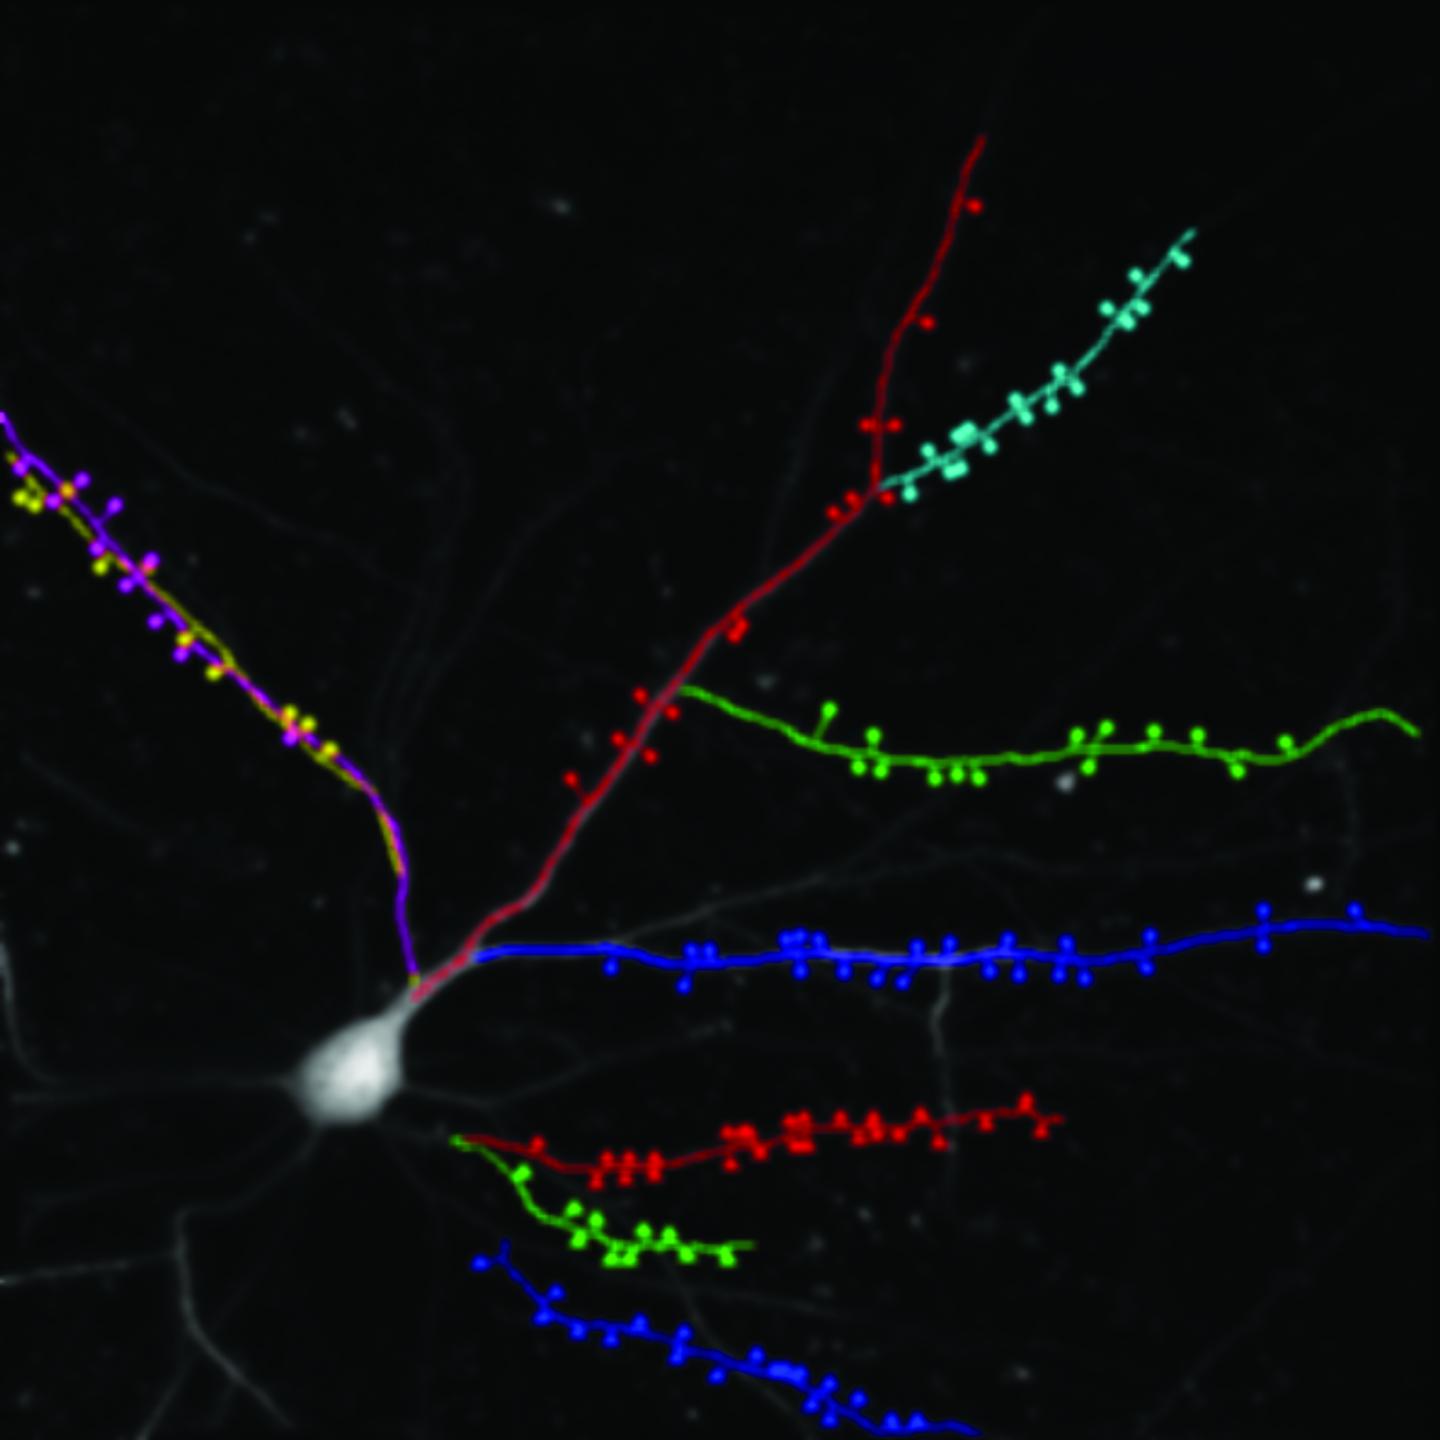 A Single Nerve Cell in the Cortex of a Live Mouse